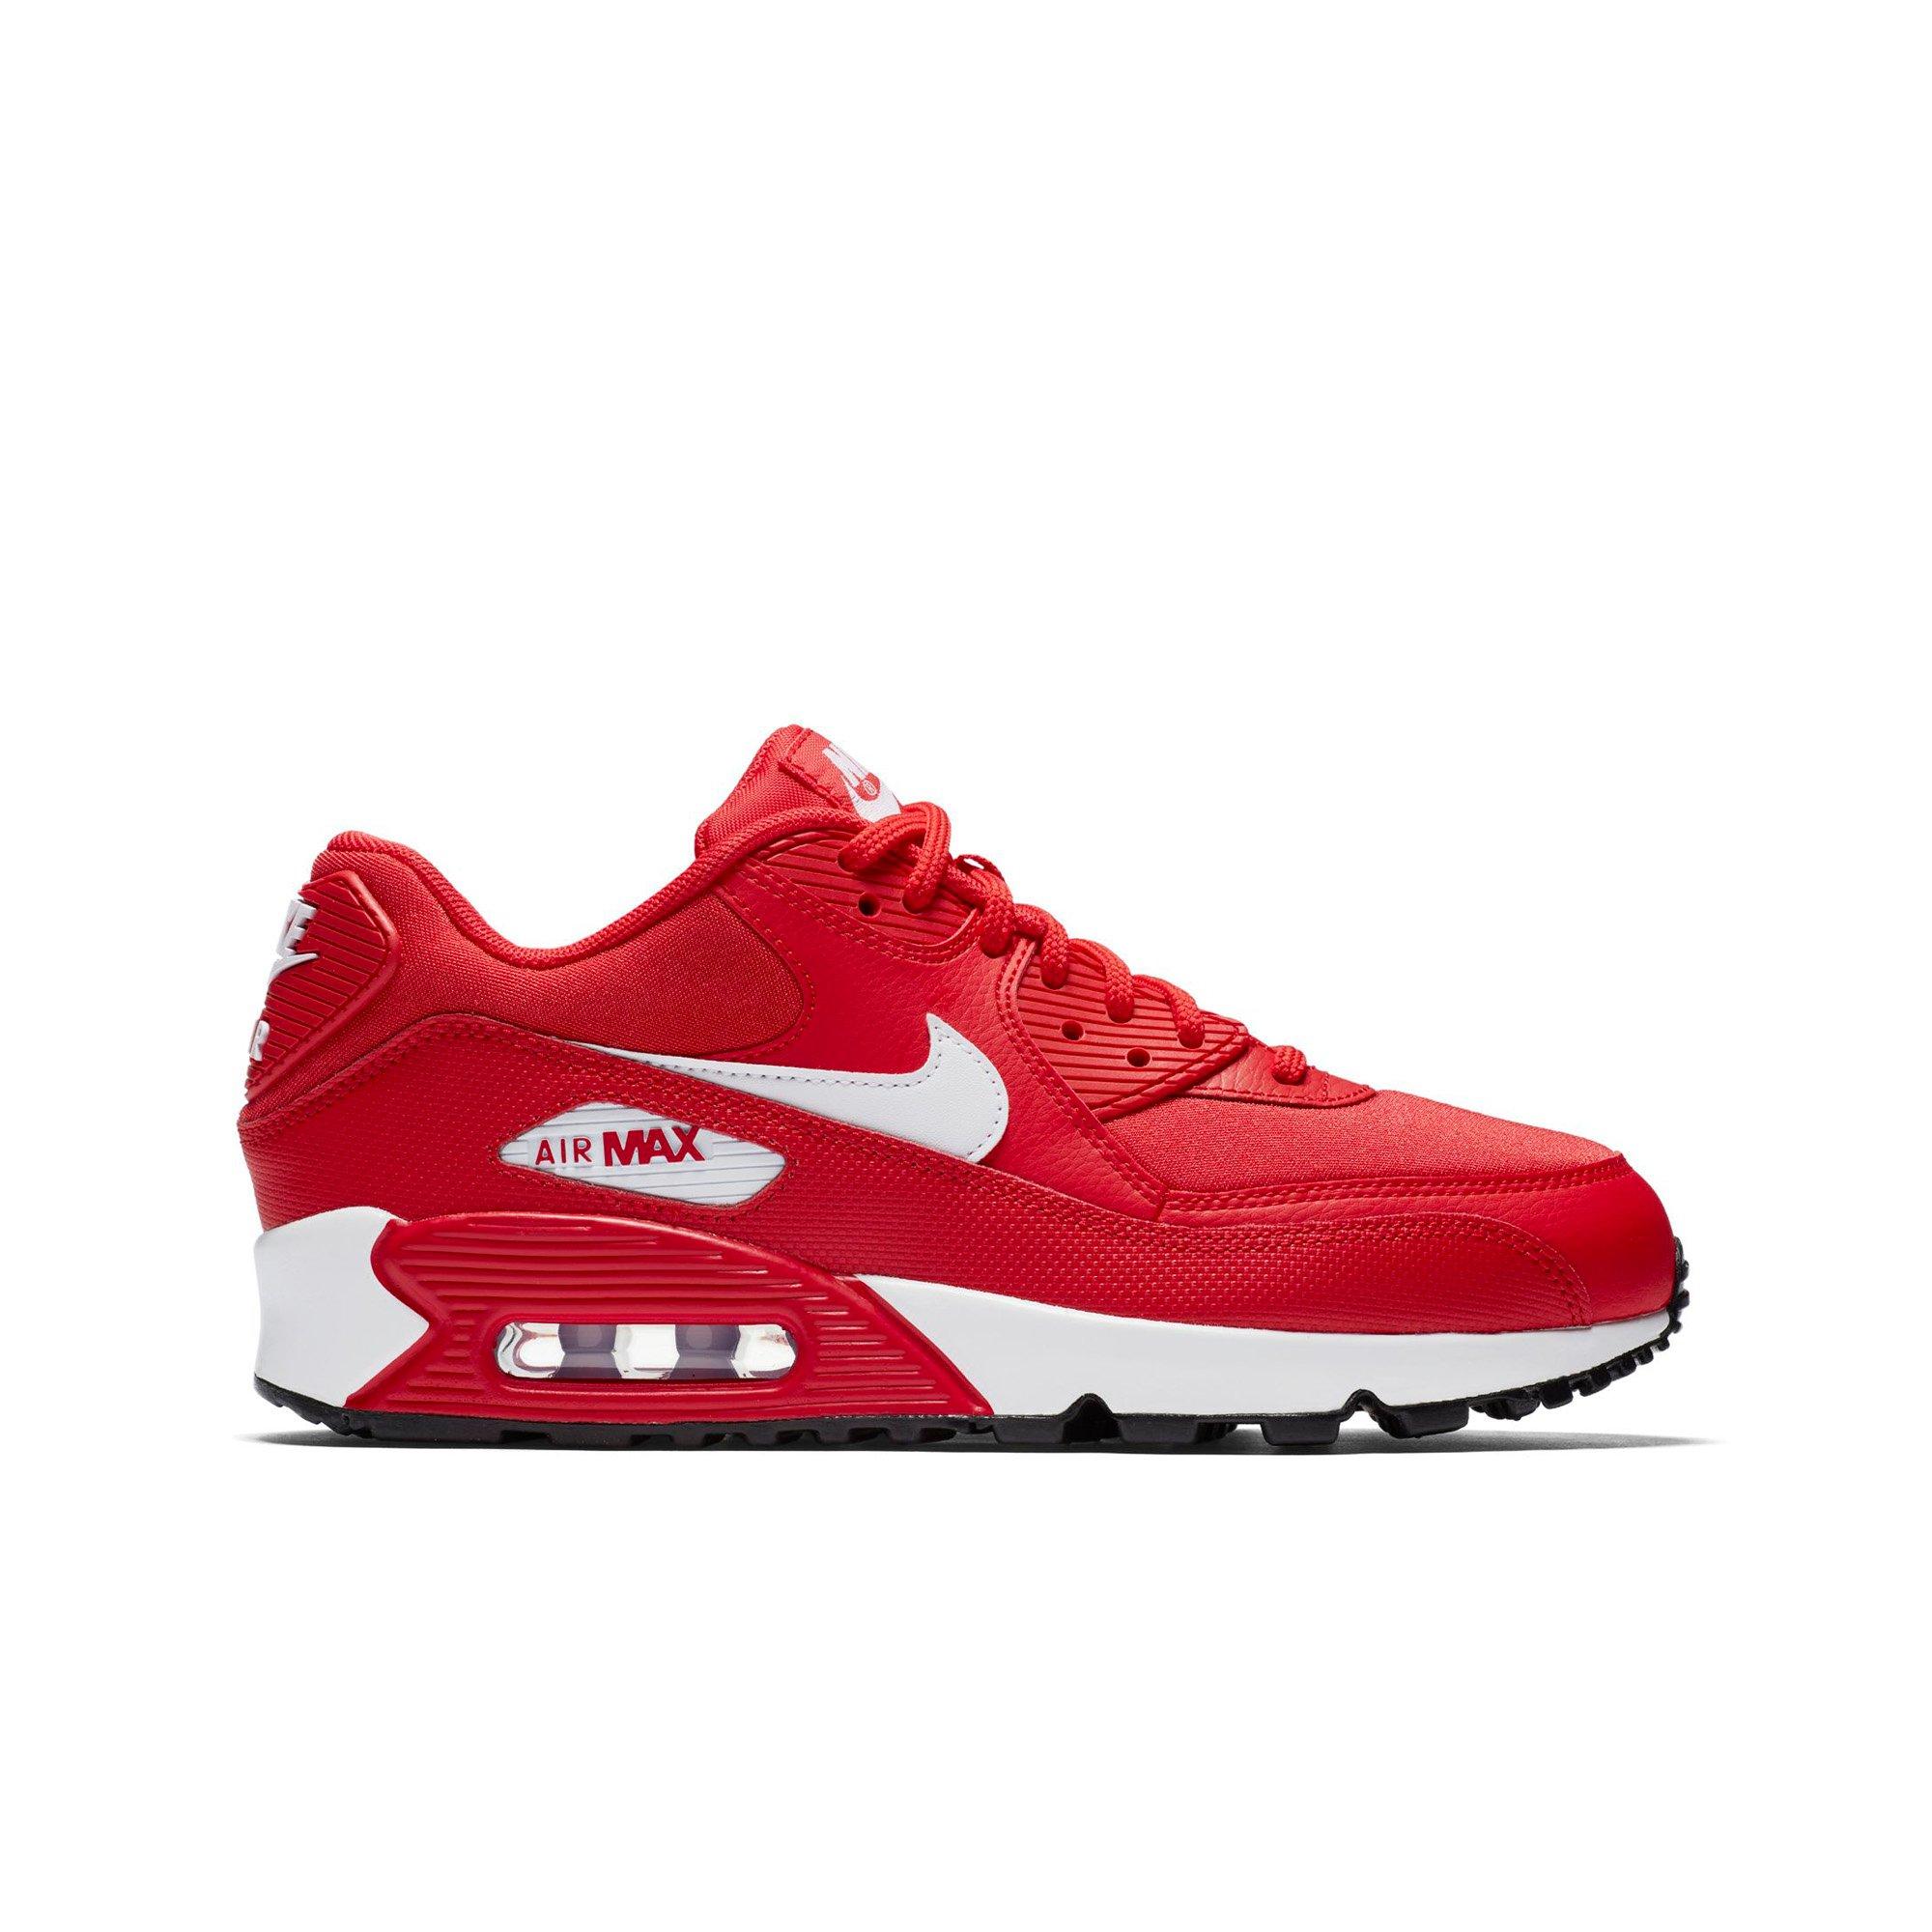 red nikes womens